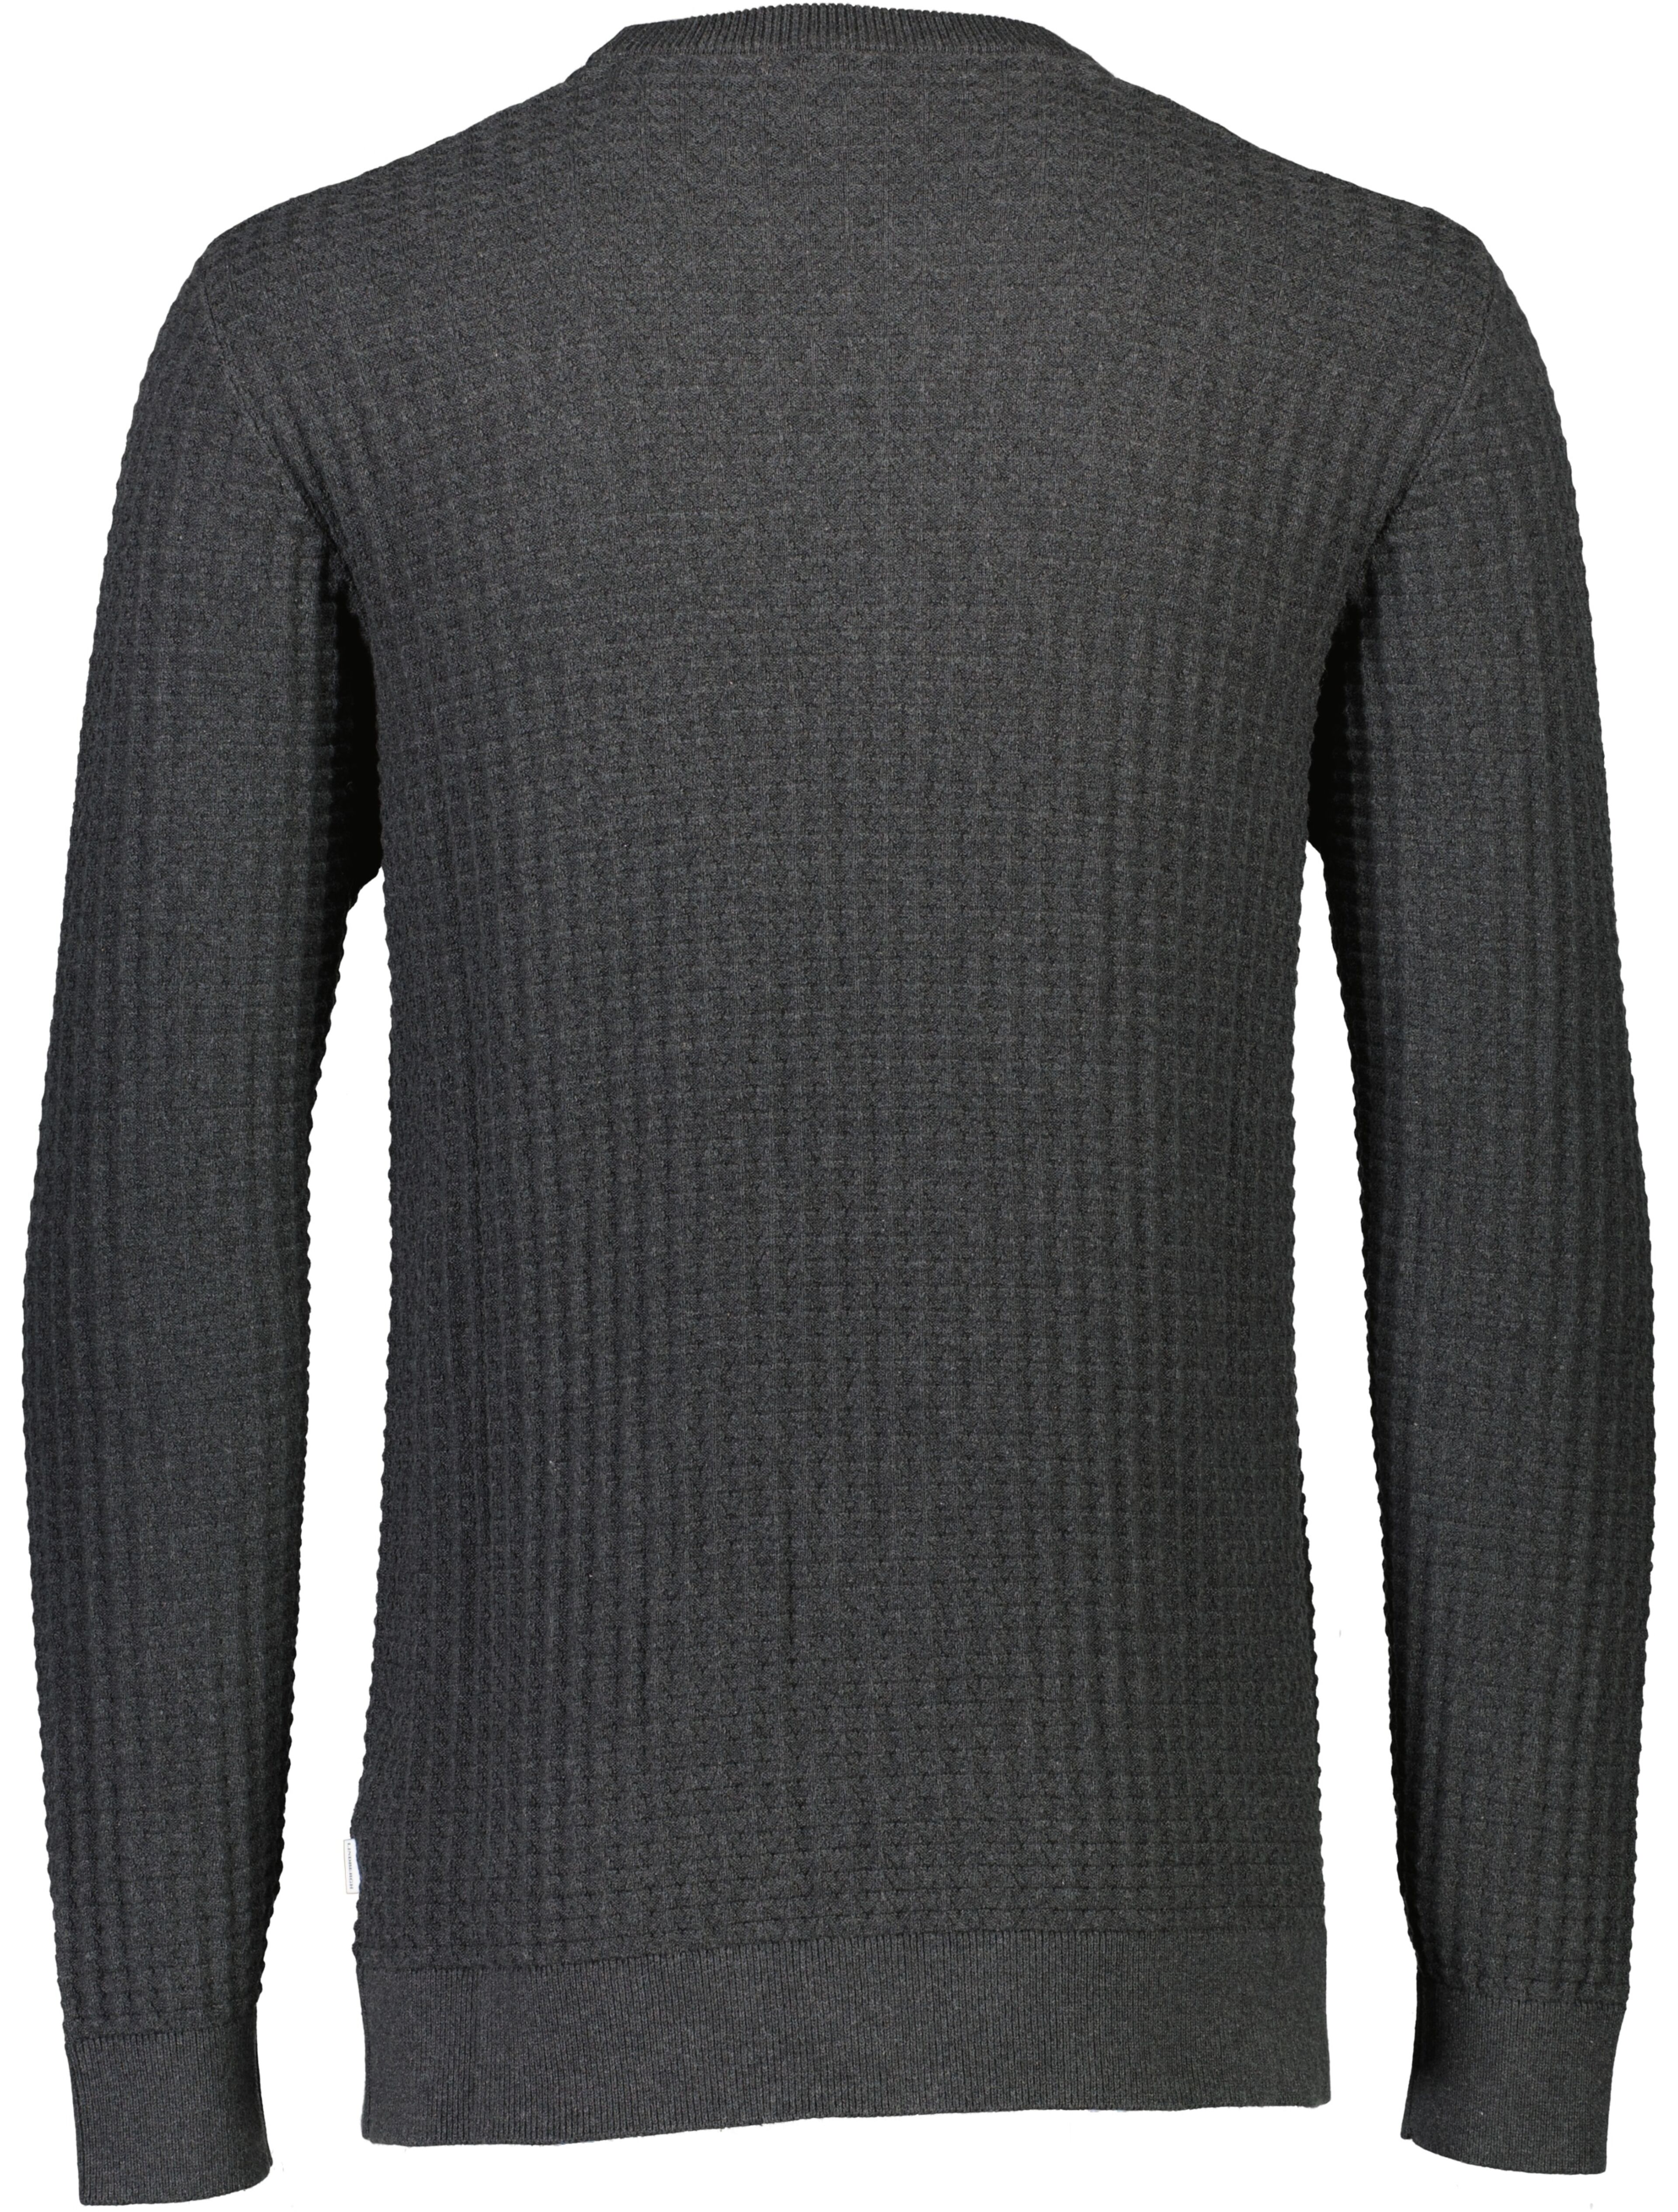 Knitwear | Relaxed fit 30-800200A